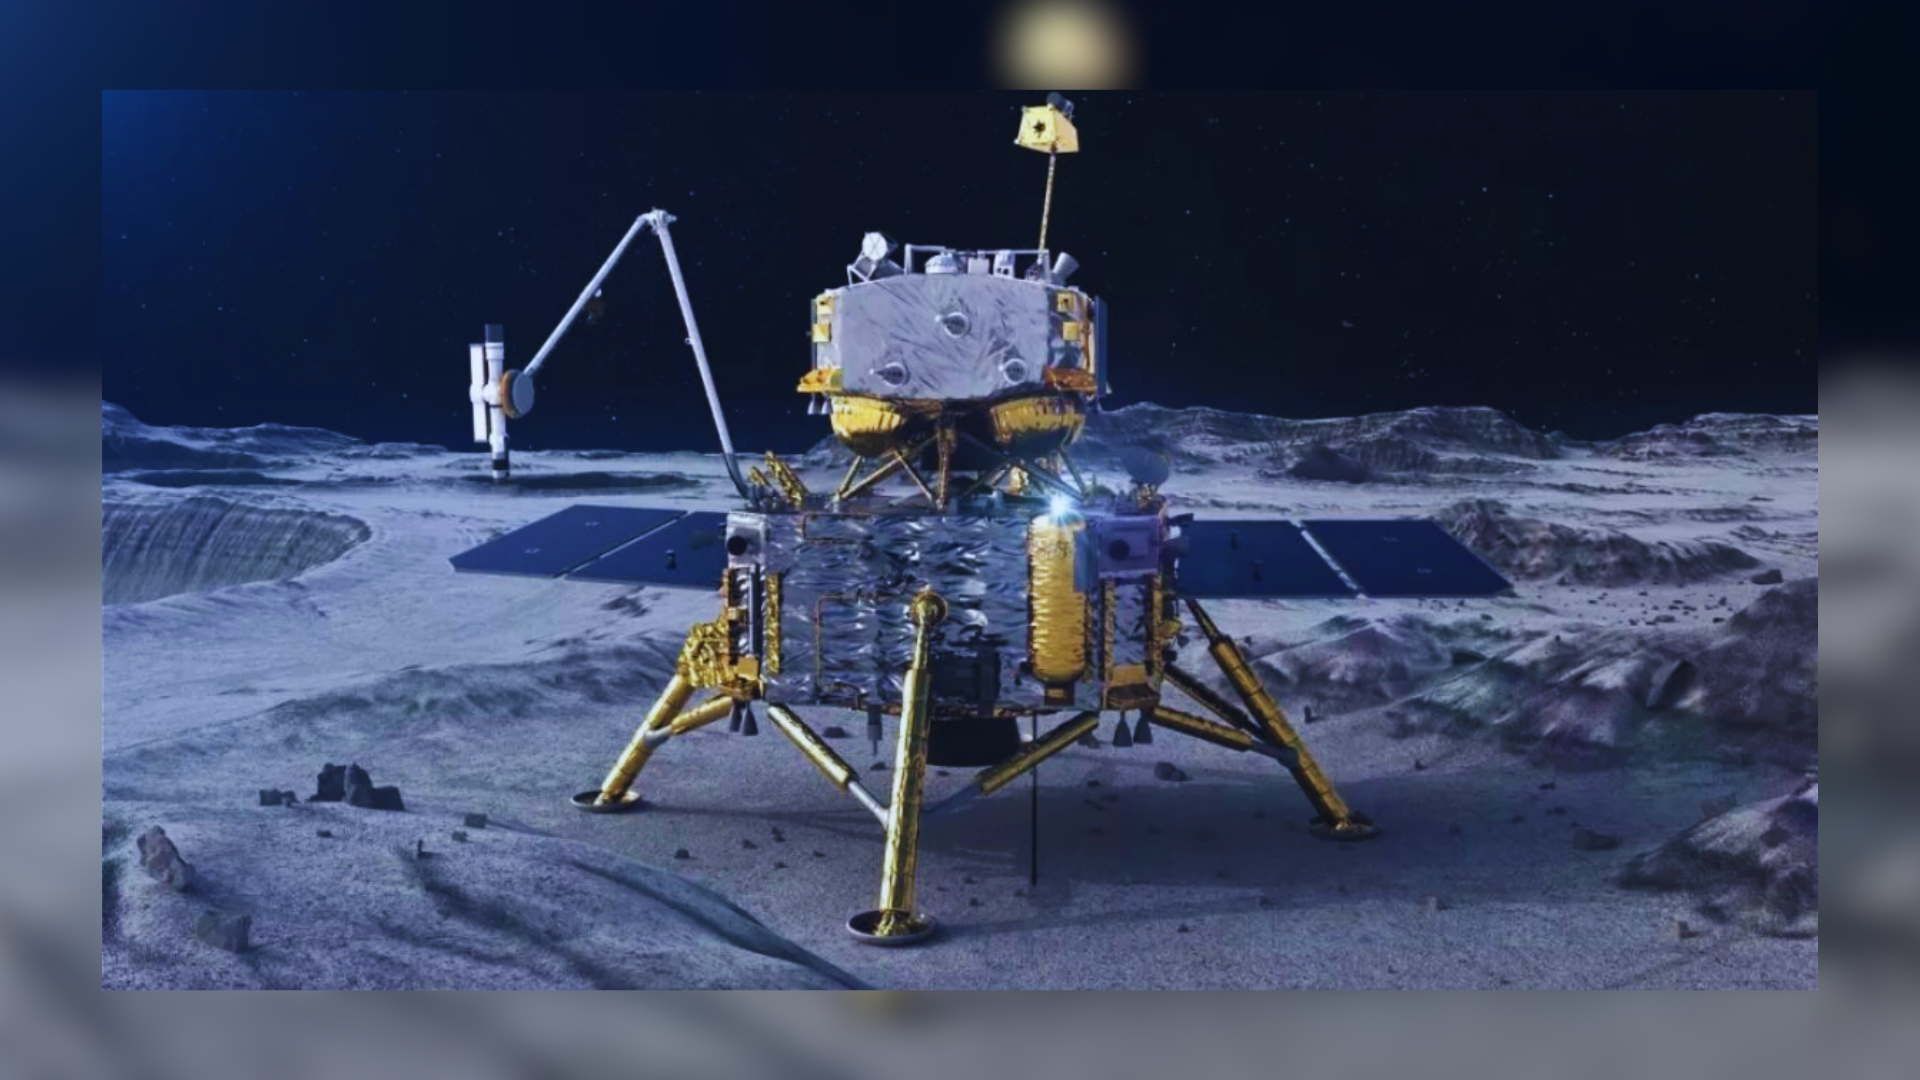 Chang’e-5 Mission Reveals Graphene On Moon, Challenging Lunar Origins Theories